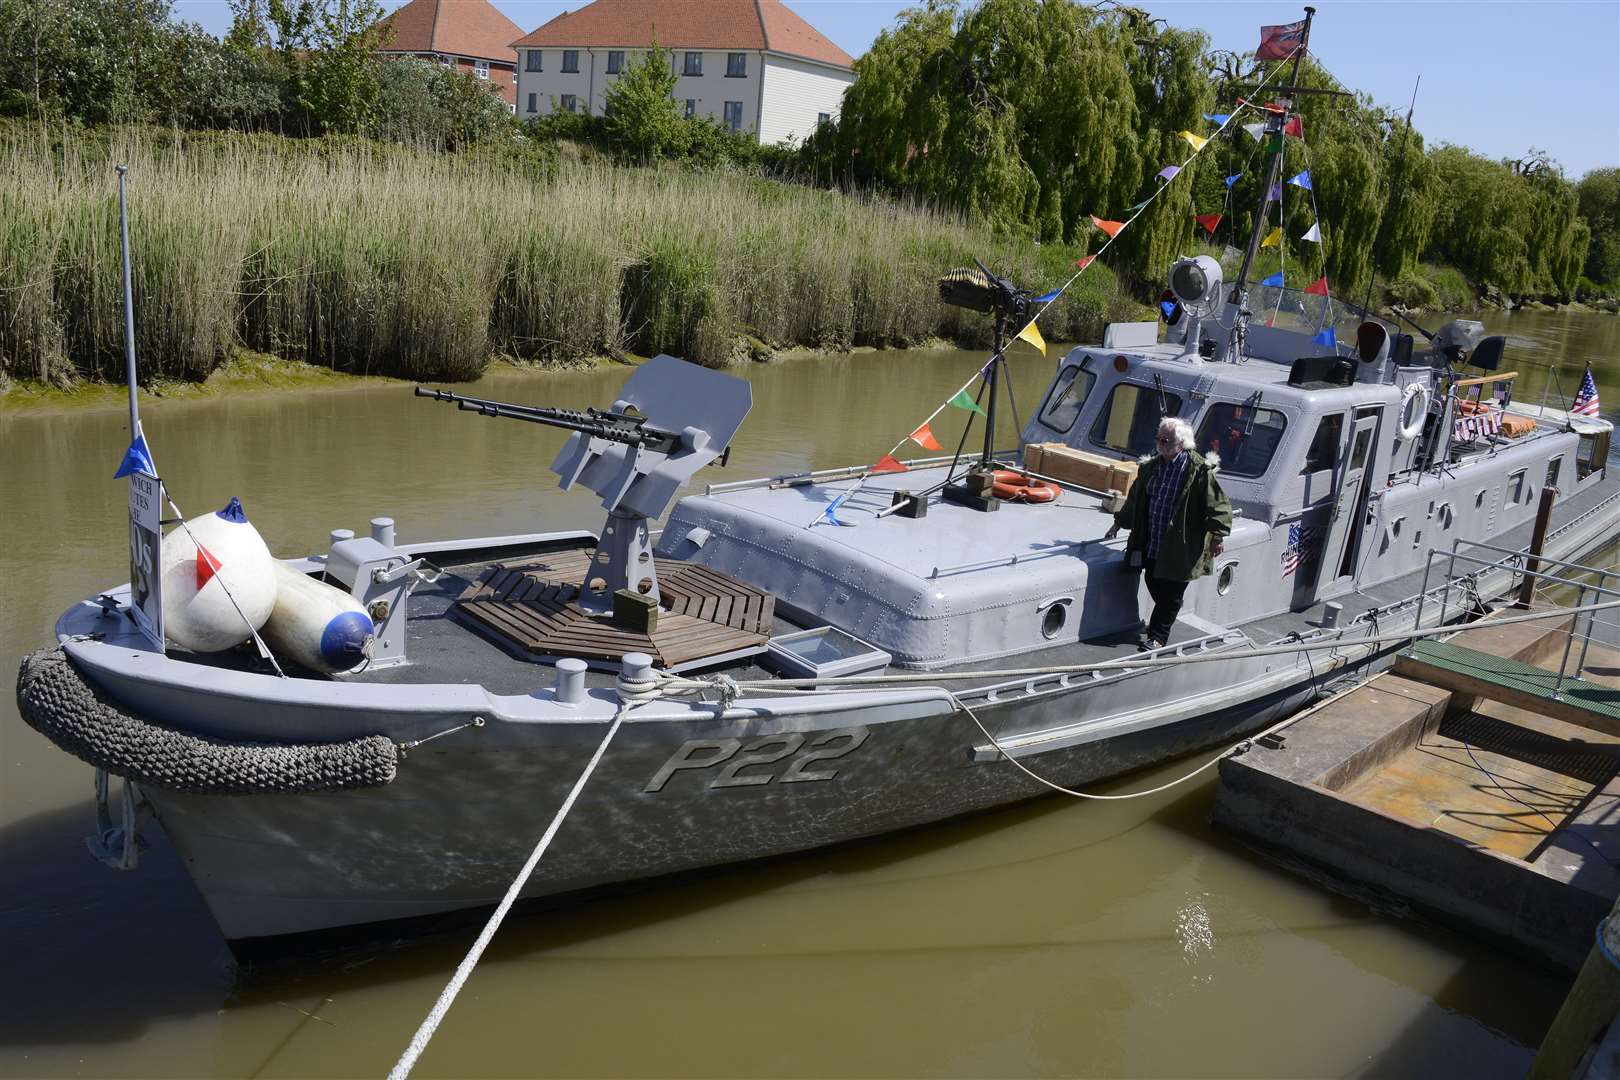 The floating relic was on show during the Sandwich Salutes The 40s event